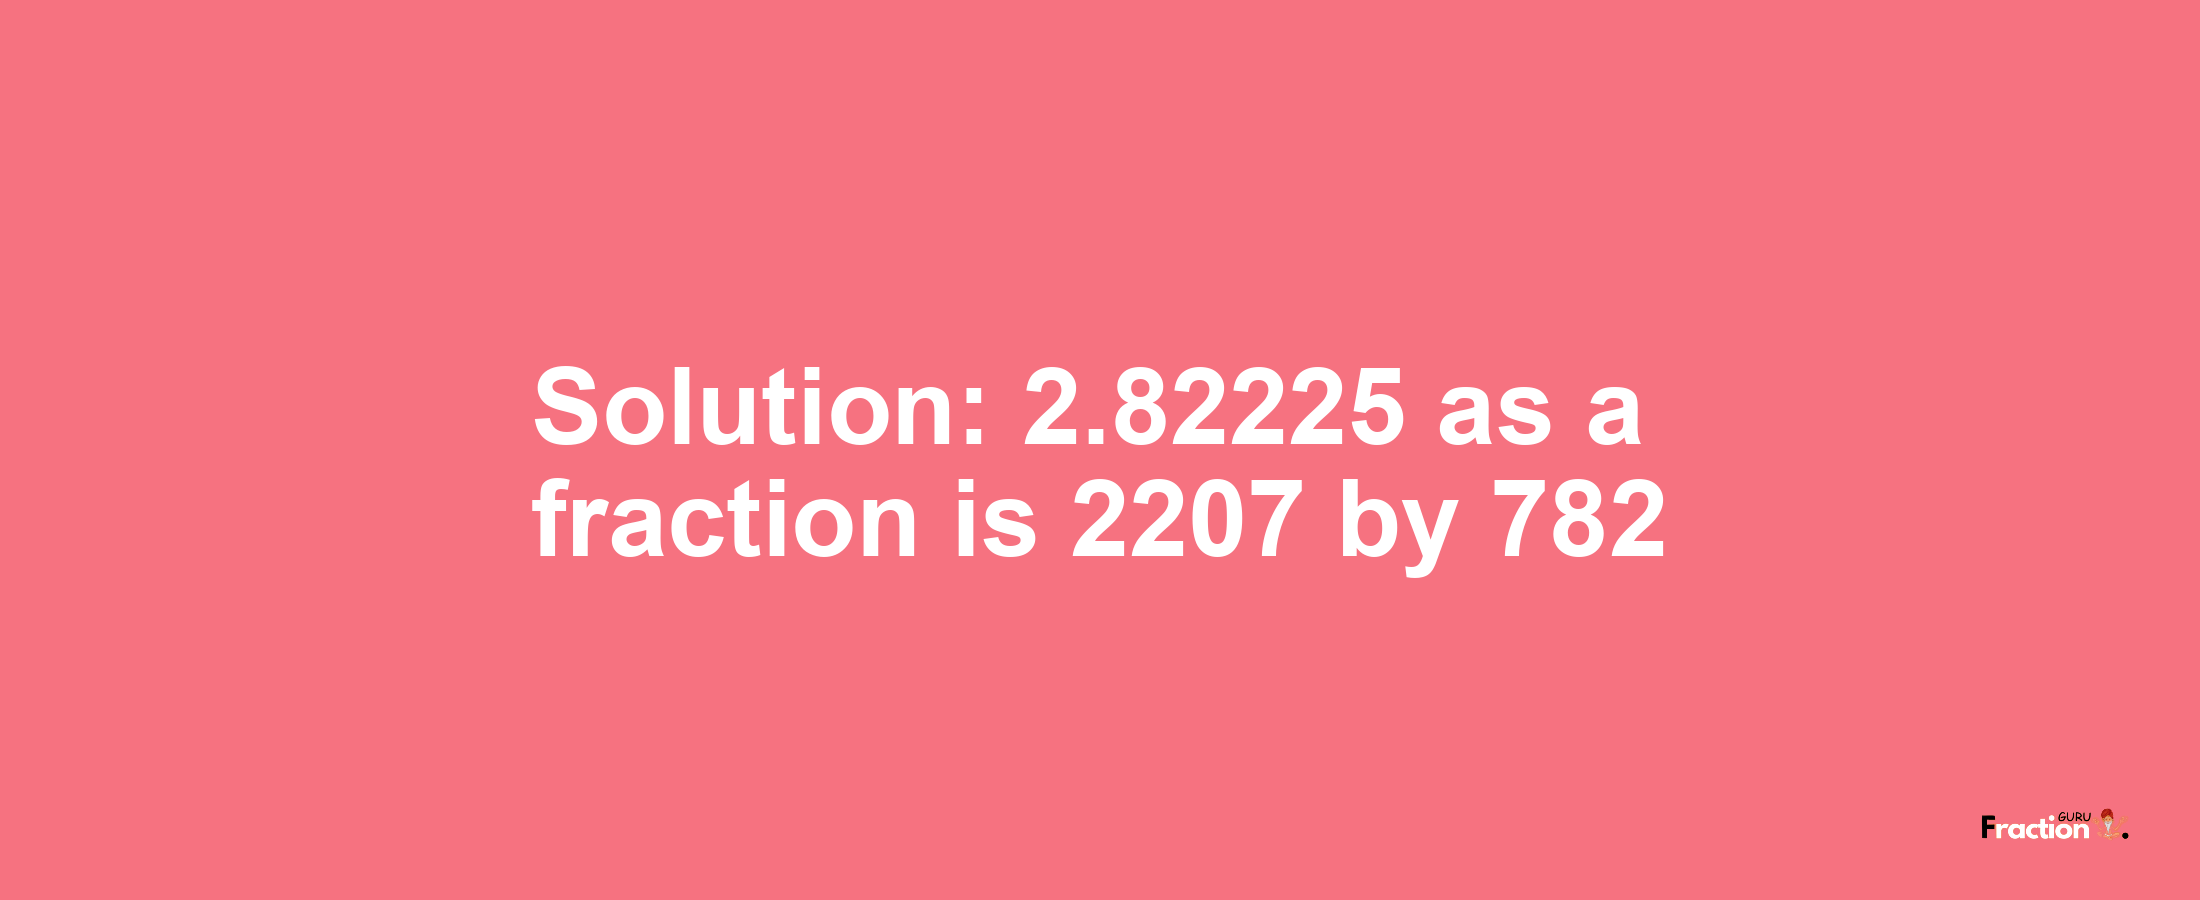 Solution:2.82225 as a fraction is 2207/782